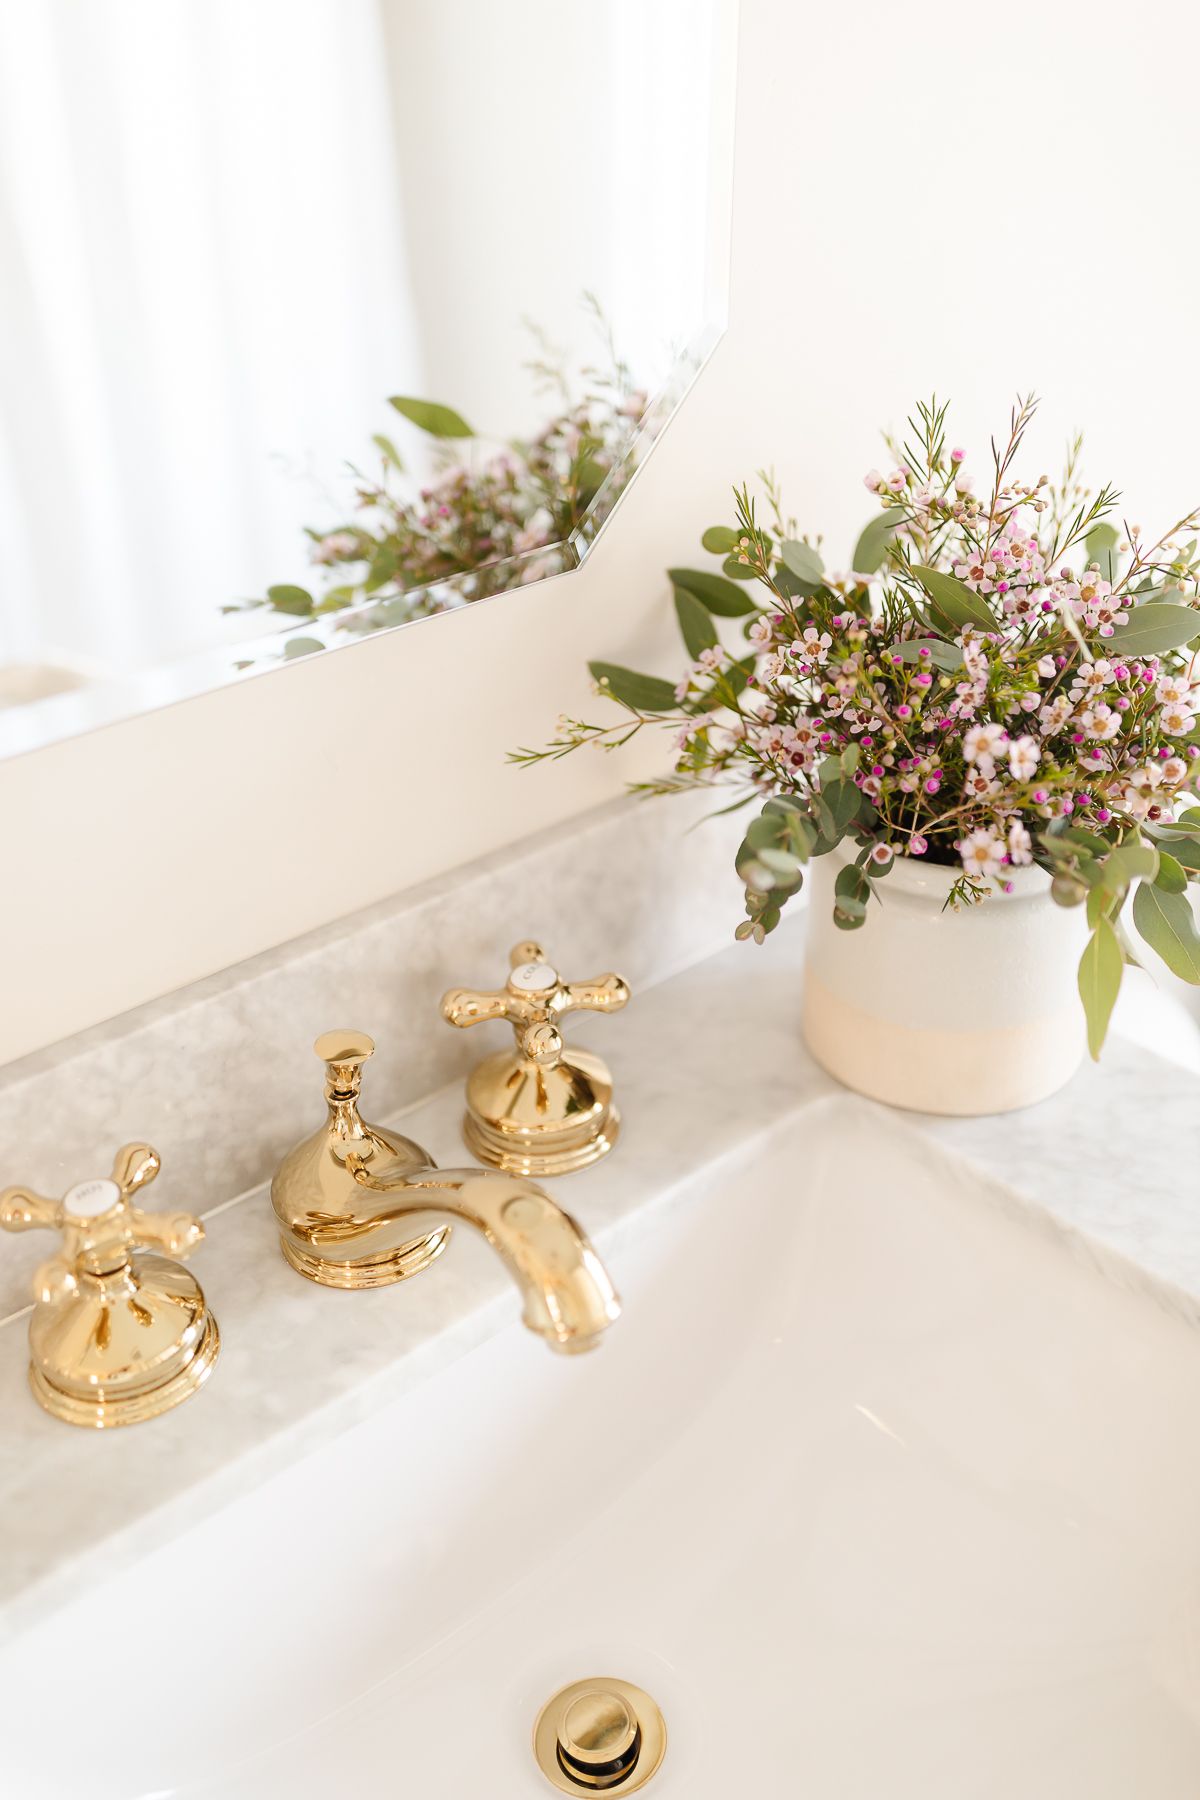 A brass faucet on a marble countertop in a bathroom